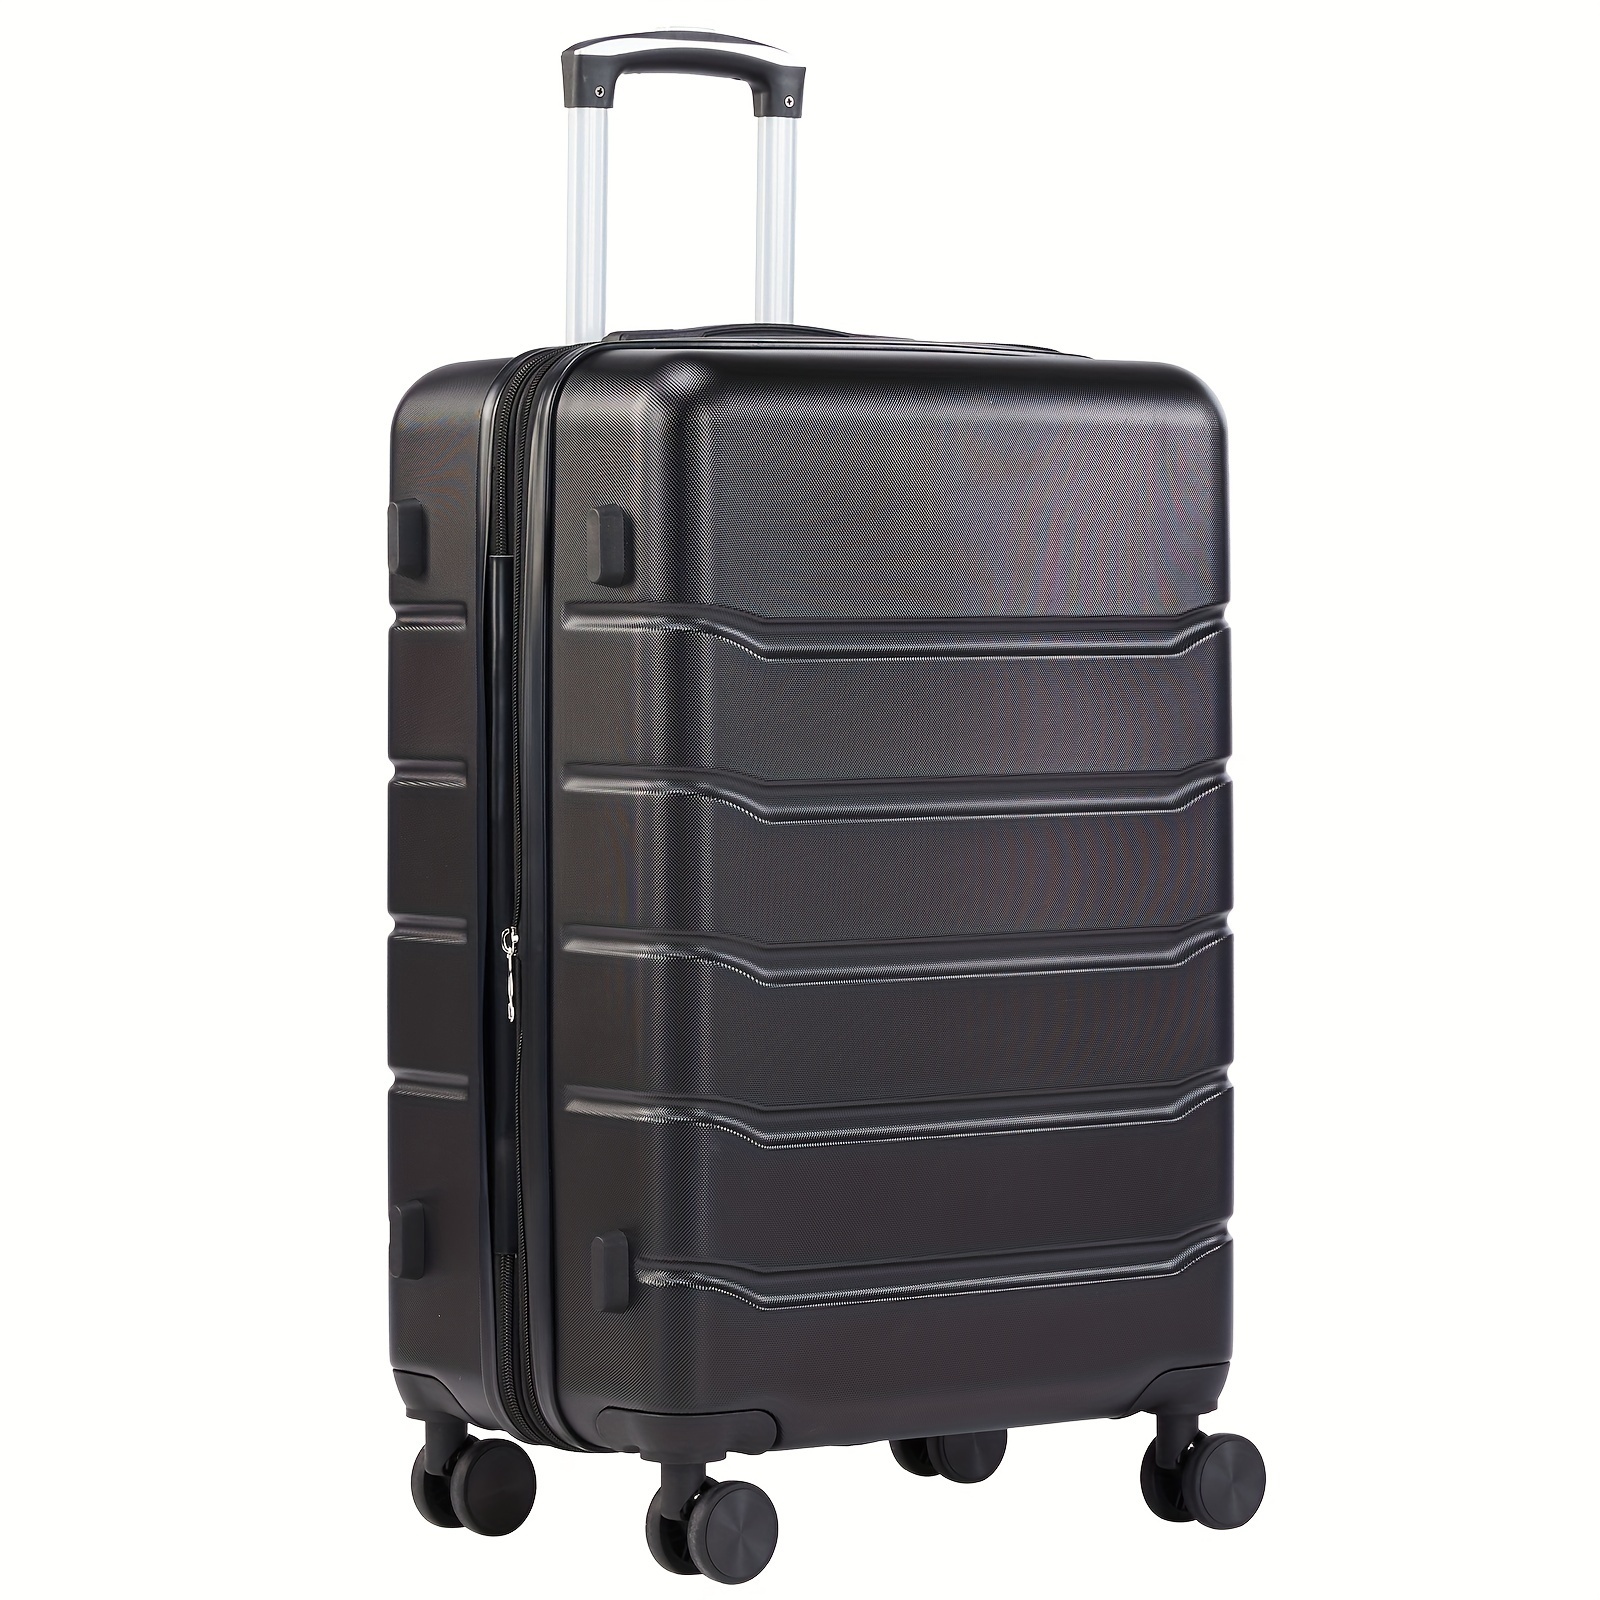 

28 Inch Carry On Luggage Hardside Expandable Suitcase With Double Spinner Wheels, Tsa Lock And Lightweight